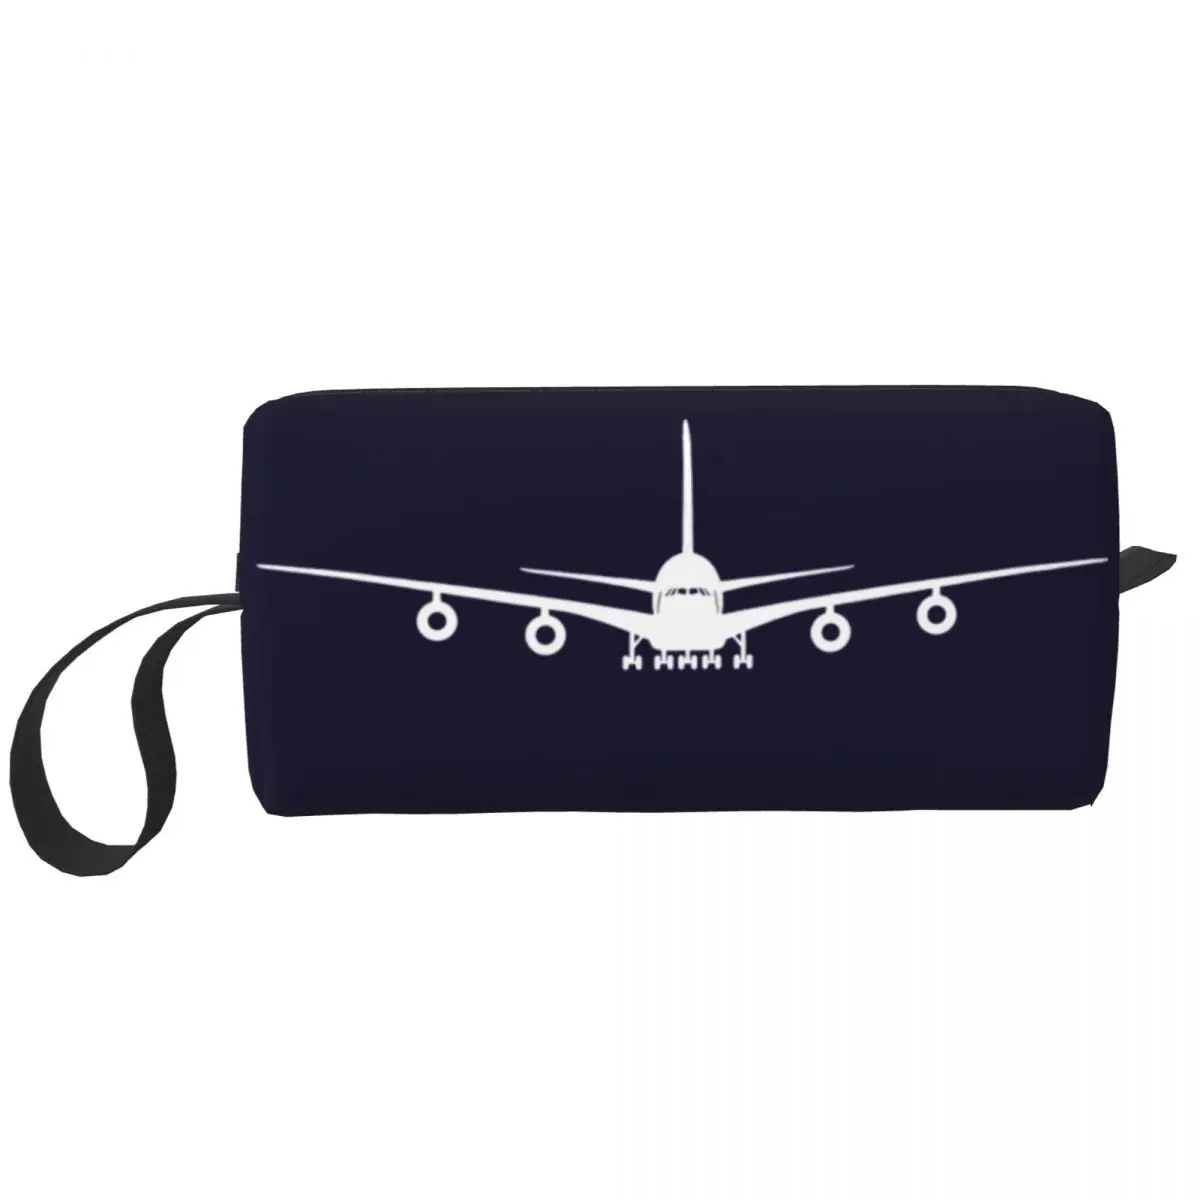 

Aircraft Travel Cosmetic Bag Fighter Pilot Aviation Airplane Toiletry Makeup Organizer Lady Beauty Storage Bags Dopp Kit Case